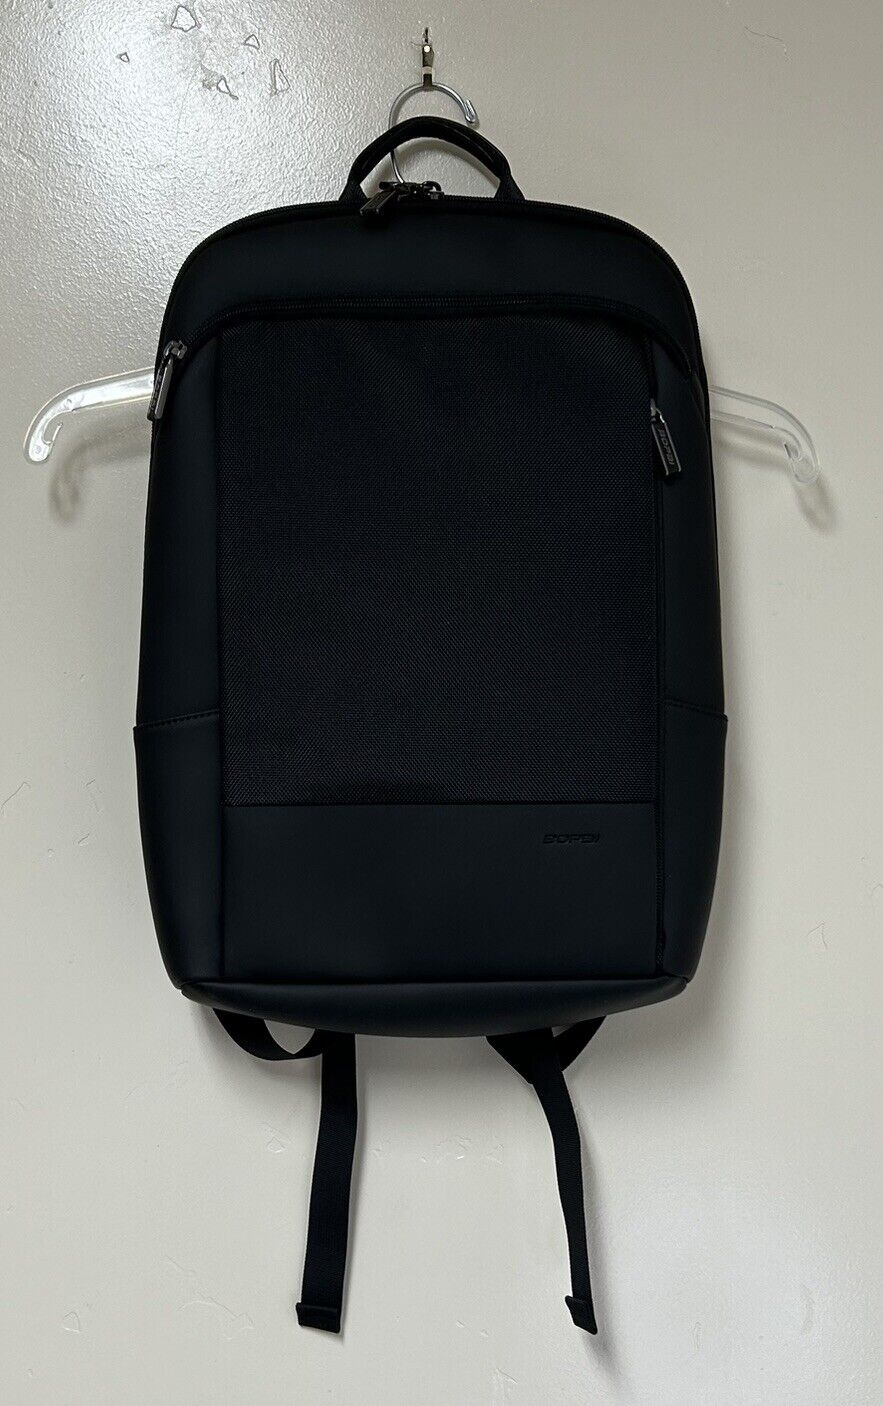 BOPAI Super Slim Security Laptop Backpack -NEW w/o Tags